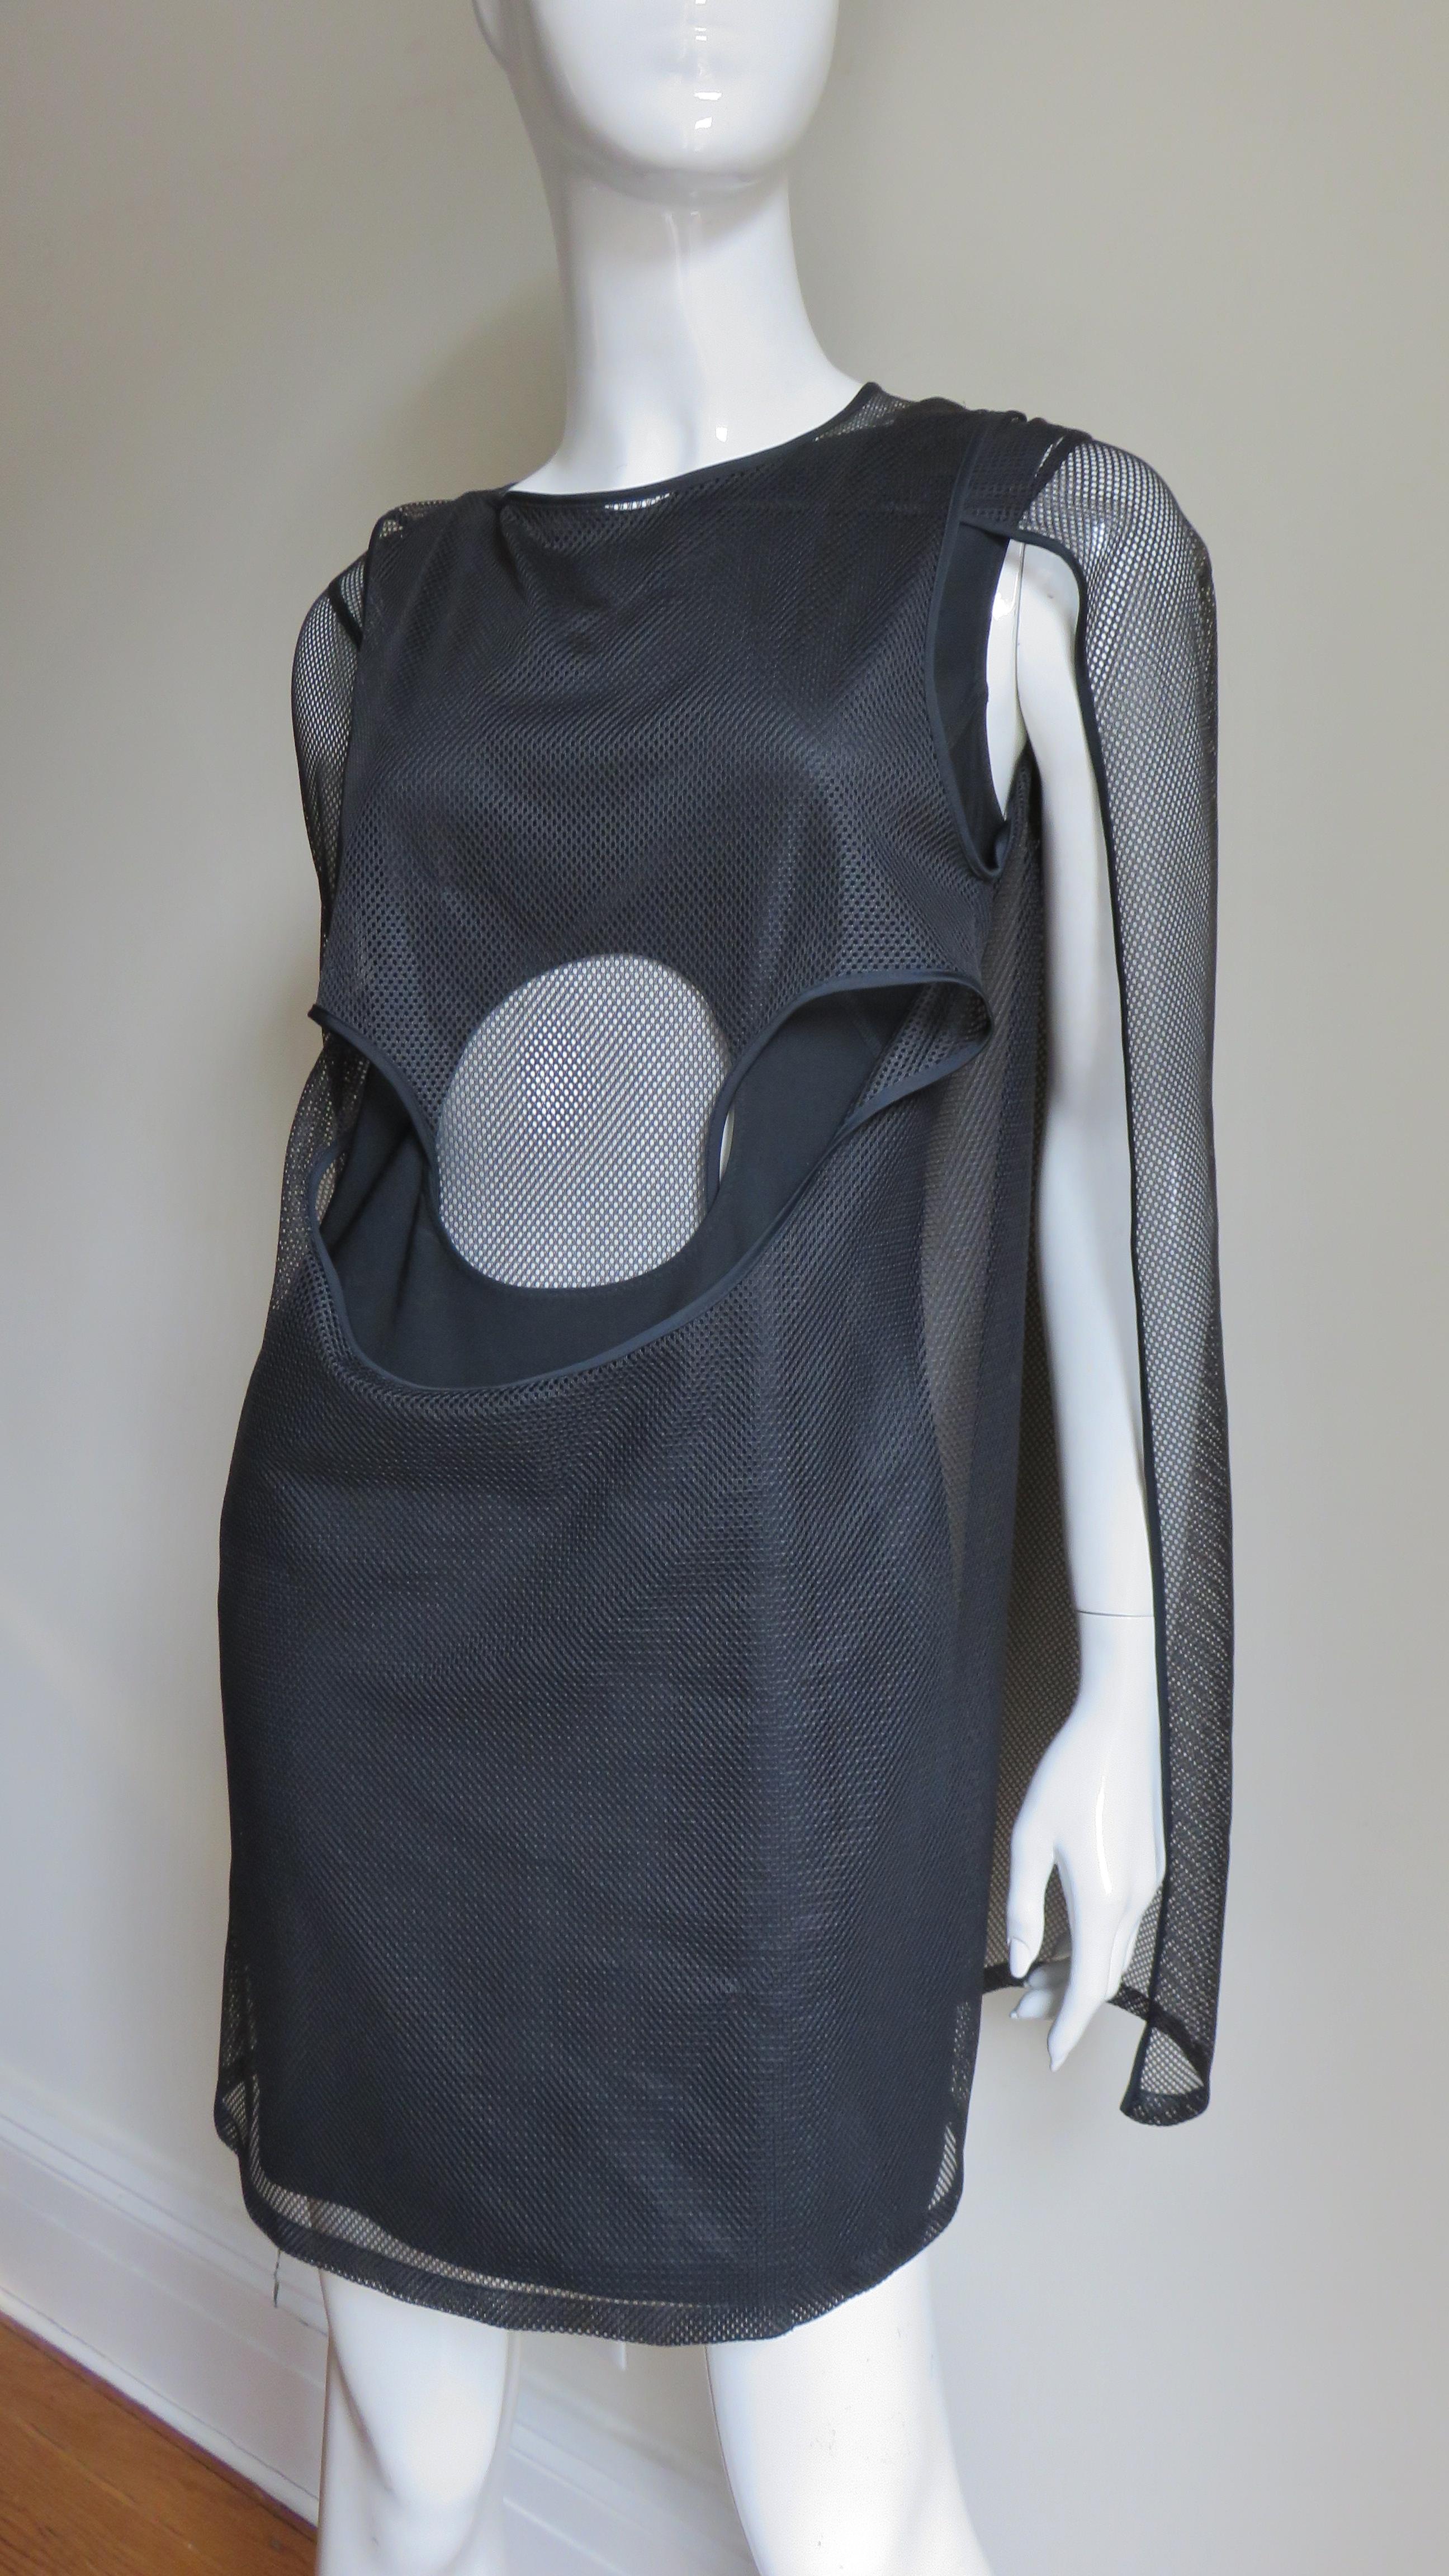 A great black stretch dress from Junya Watanabe for Comme des Garcons, CDG.  It is sleeveless with a cutout circle at the front waist and several layers of black net over top. It slips on over the head.
Fits sizes Small, Medium.  Marked size